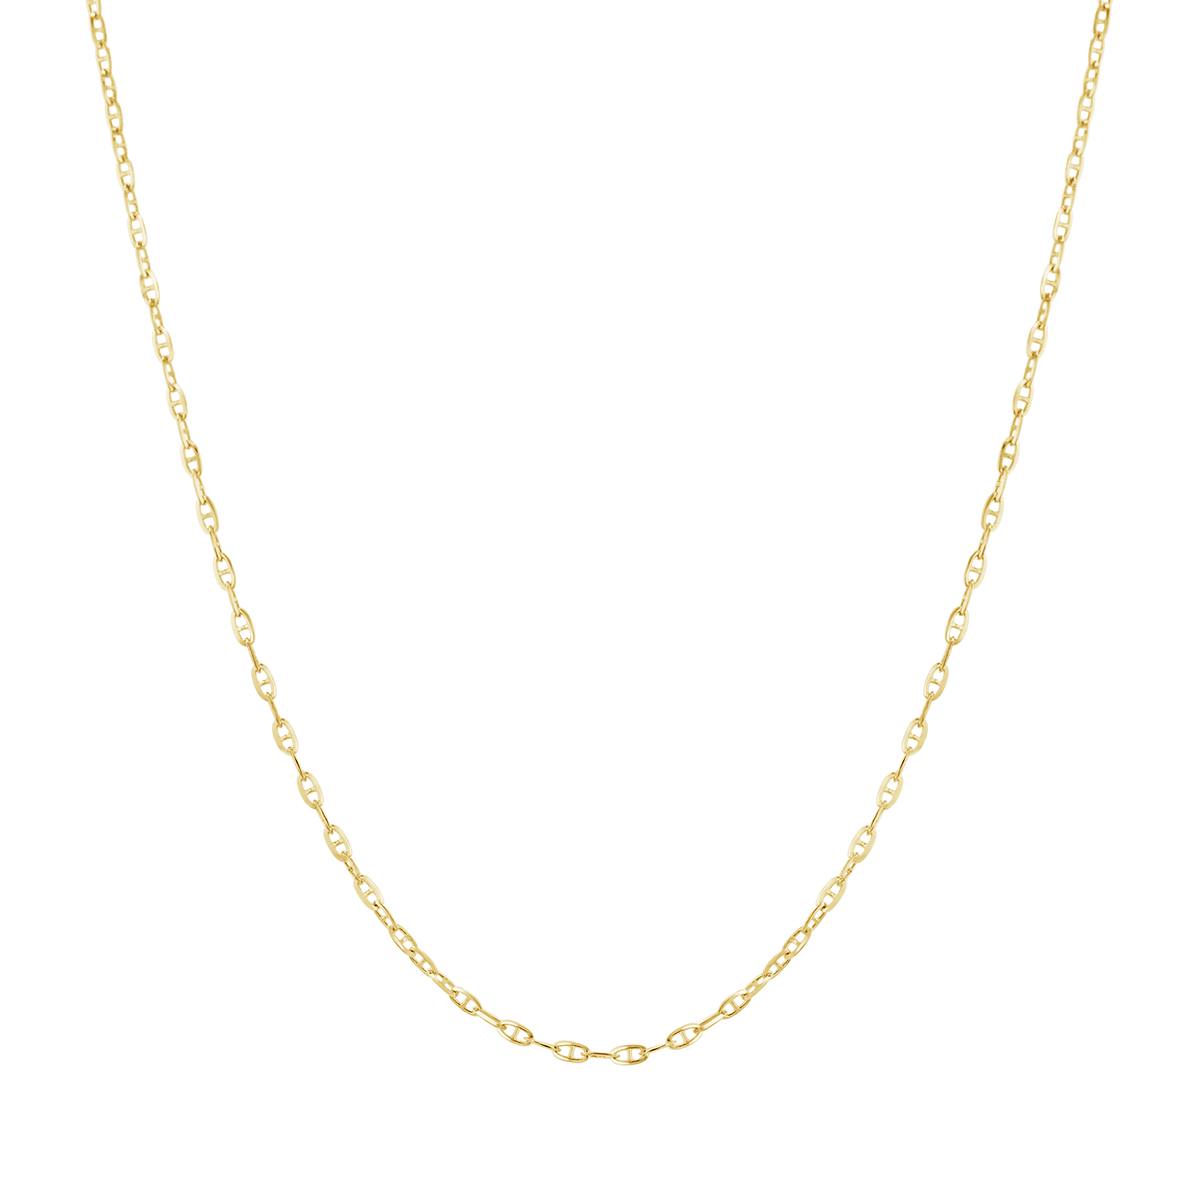 Anchor Chain Necklace - Nautical Gold Necklace - Mariner Link Necklace - Gold Necklace - Nautical 